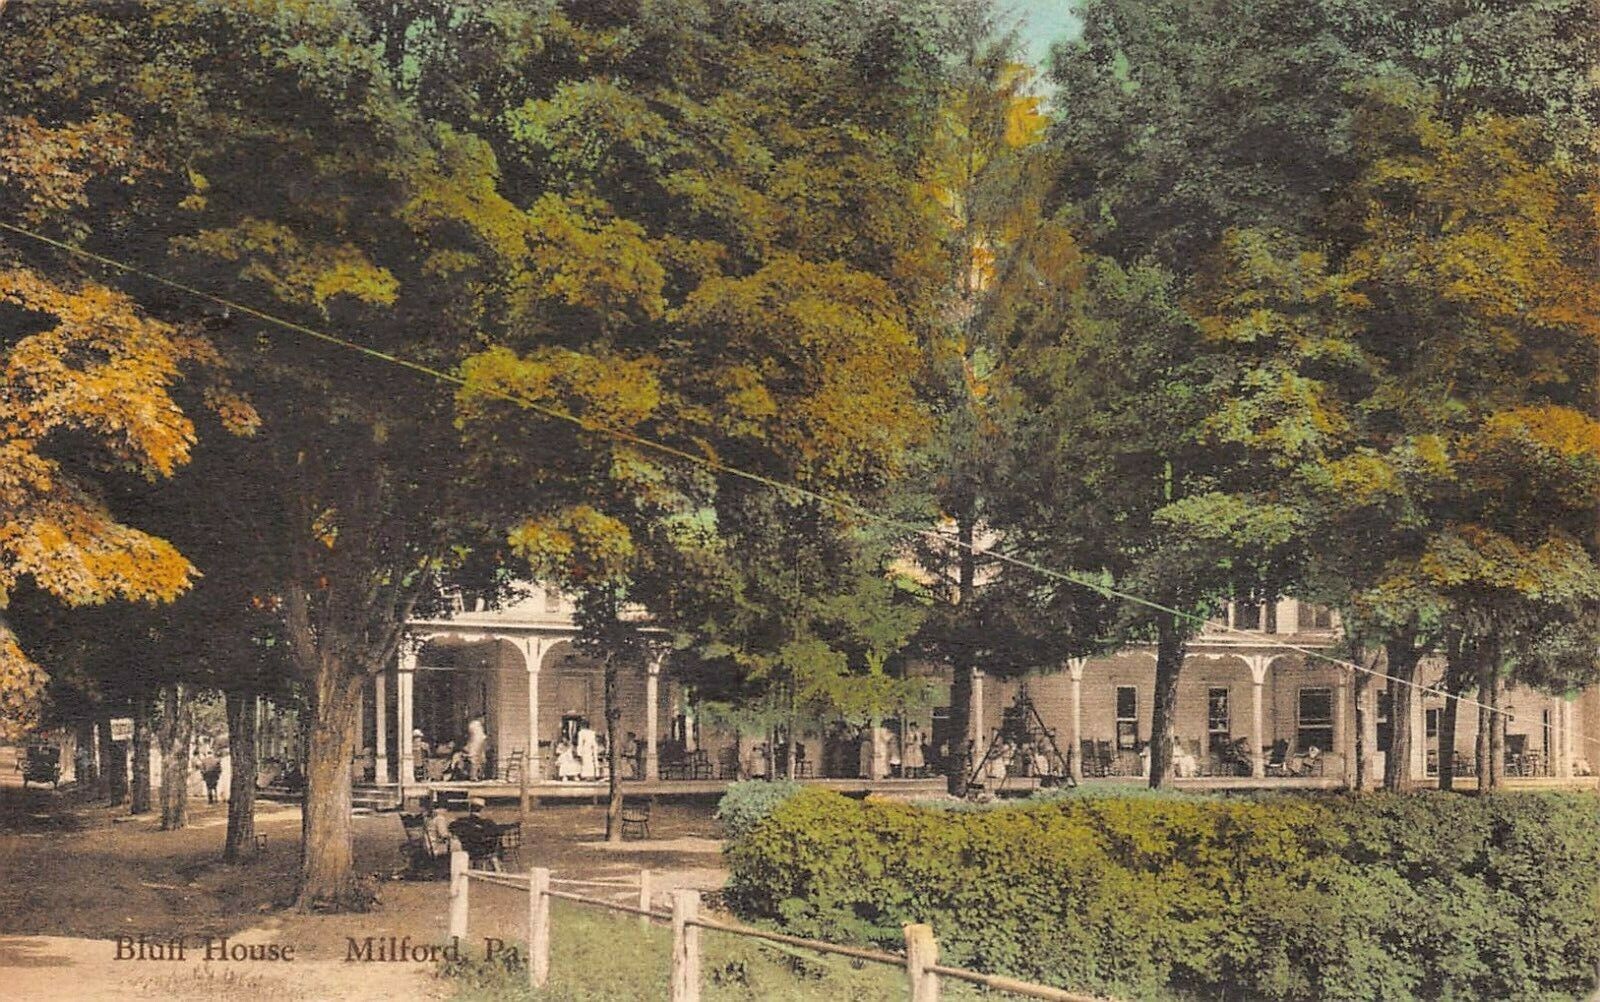 Bluff House, Milford, PA, Early Hand Colored Postcard, Used in 1933